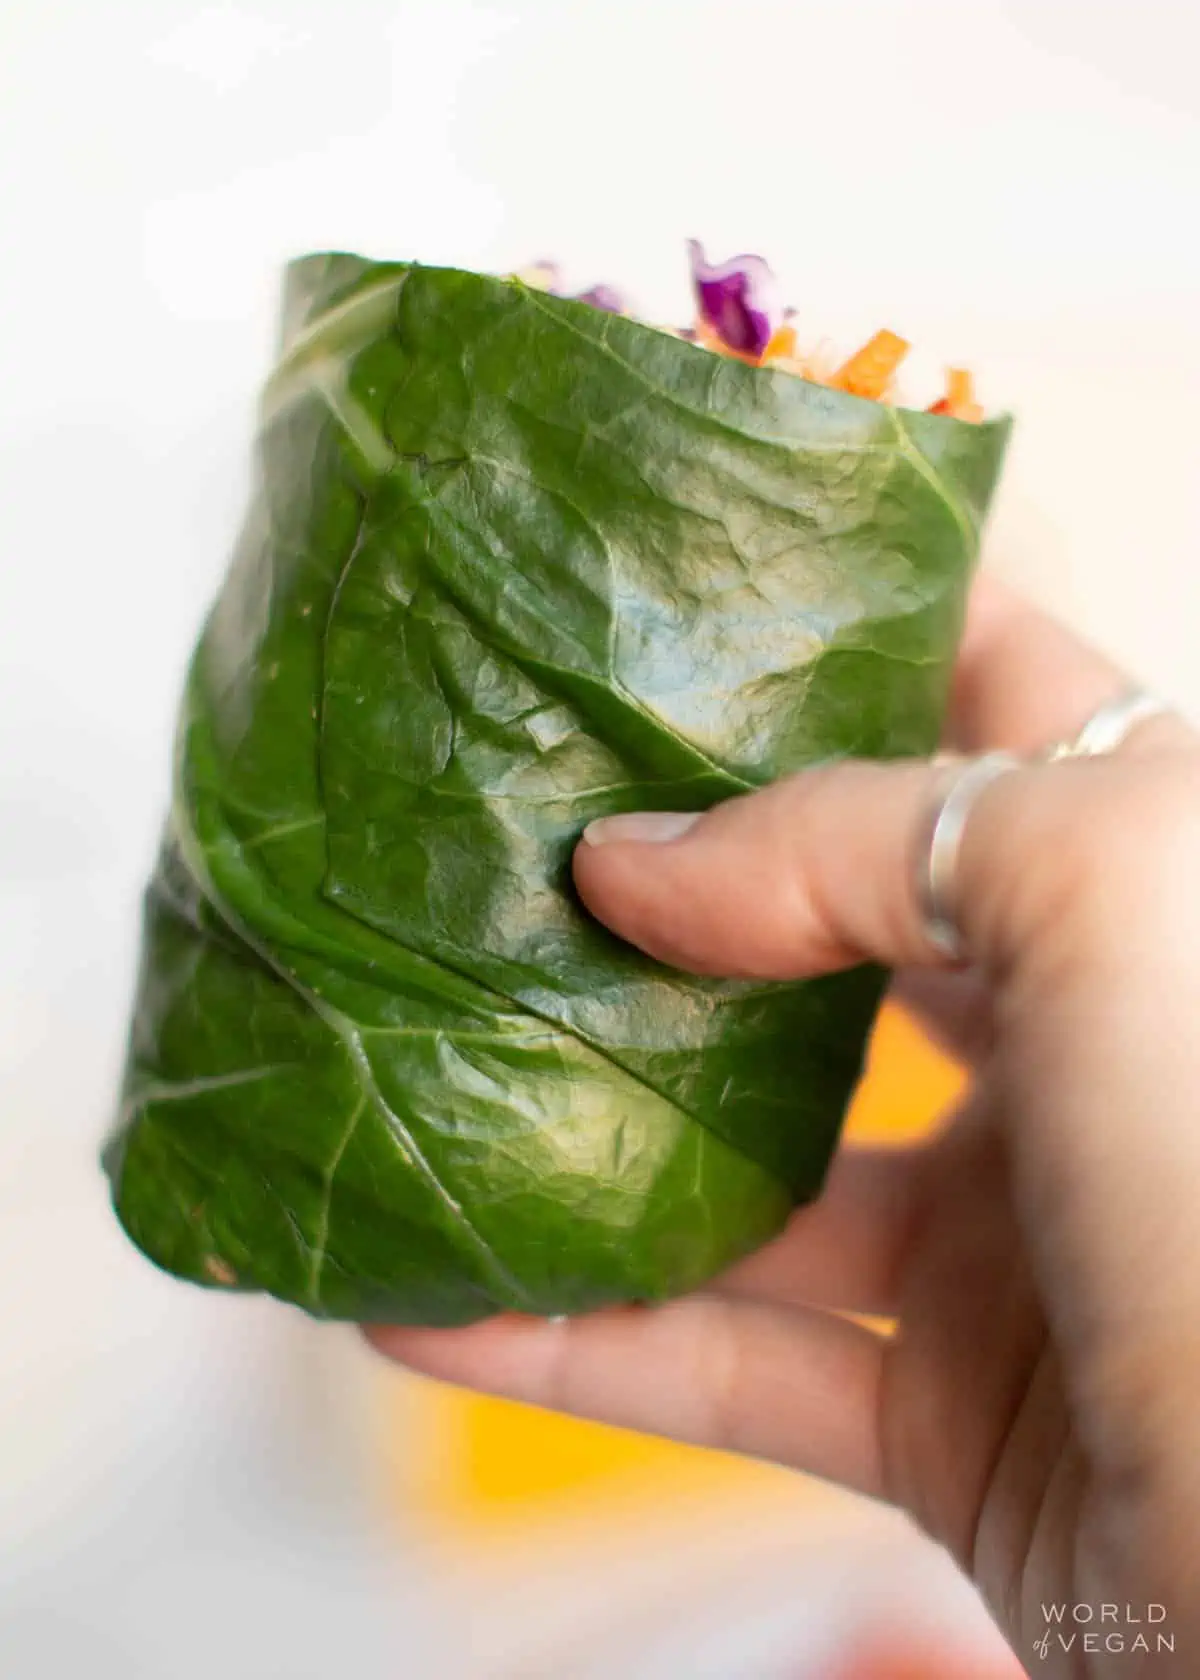 Hand holding a collard green wrap that has been sliced in half.